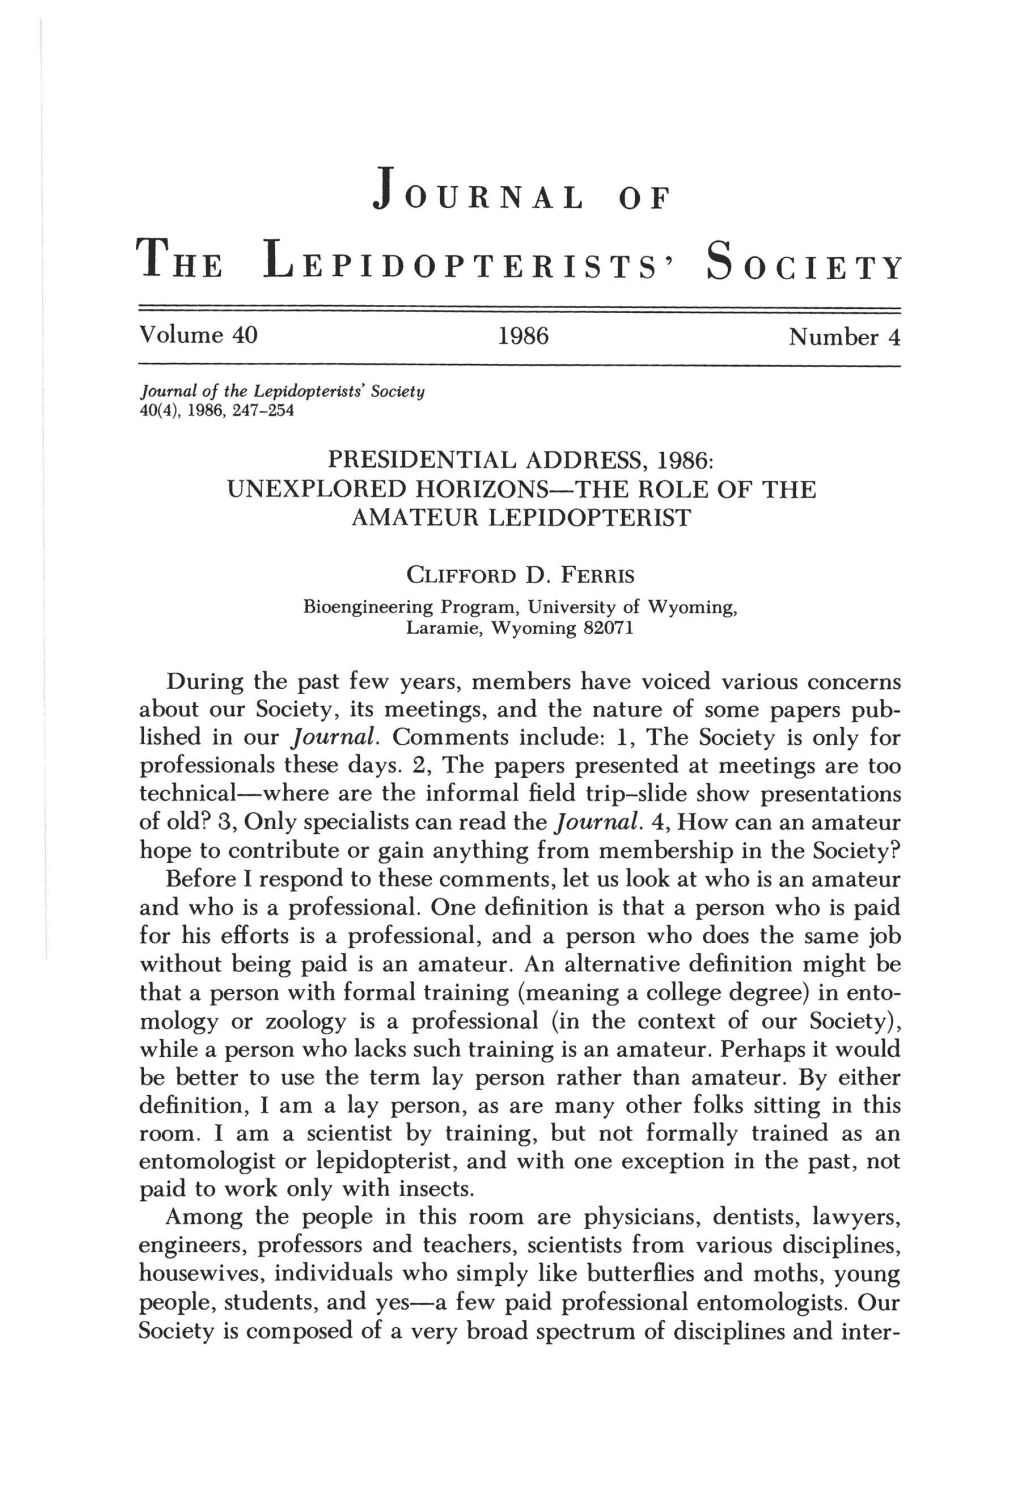 Presidential Address, 1986: Unexplored Horizons-The Role of the Amateur Lepidopterist